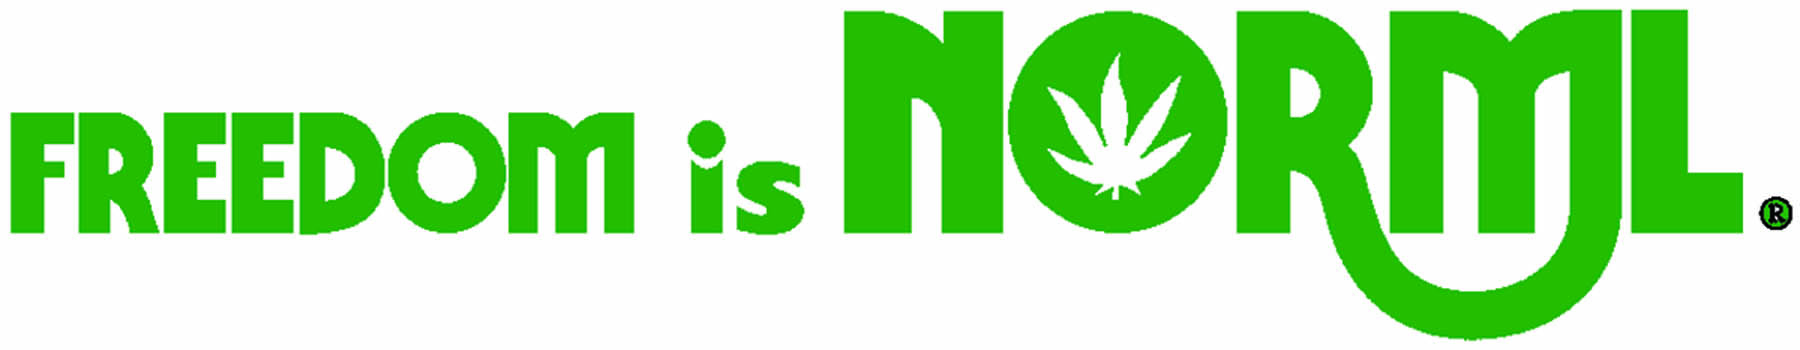 A-Short-History-of-NORML-1.-NORML-was-established-in-1970-and-has-been-prominent-in-the-fight-to-legalise-cannabis-since-then-blog.norml_.org_.jpg